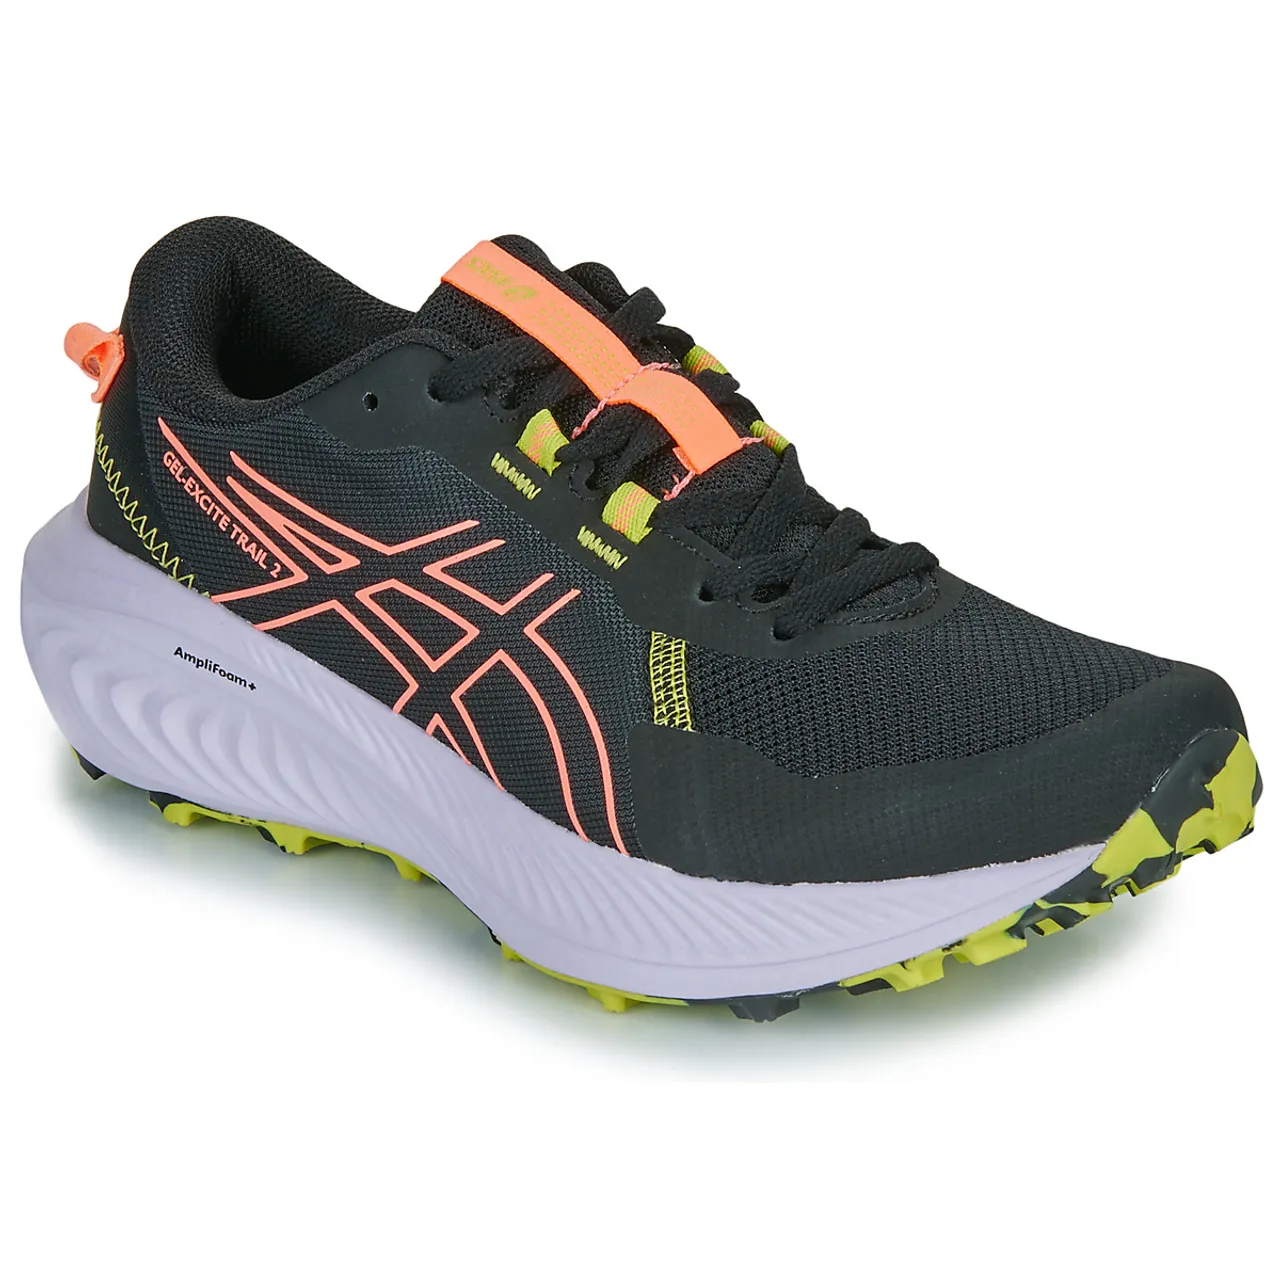 Asics  GEL-EXCITE TRAIL 2  women's Running Trainers in Black